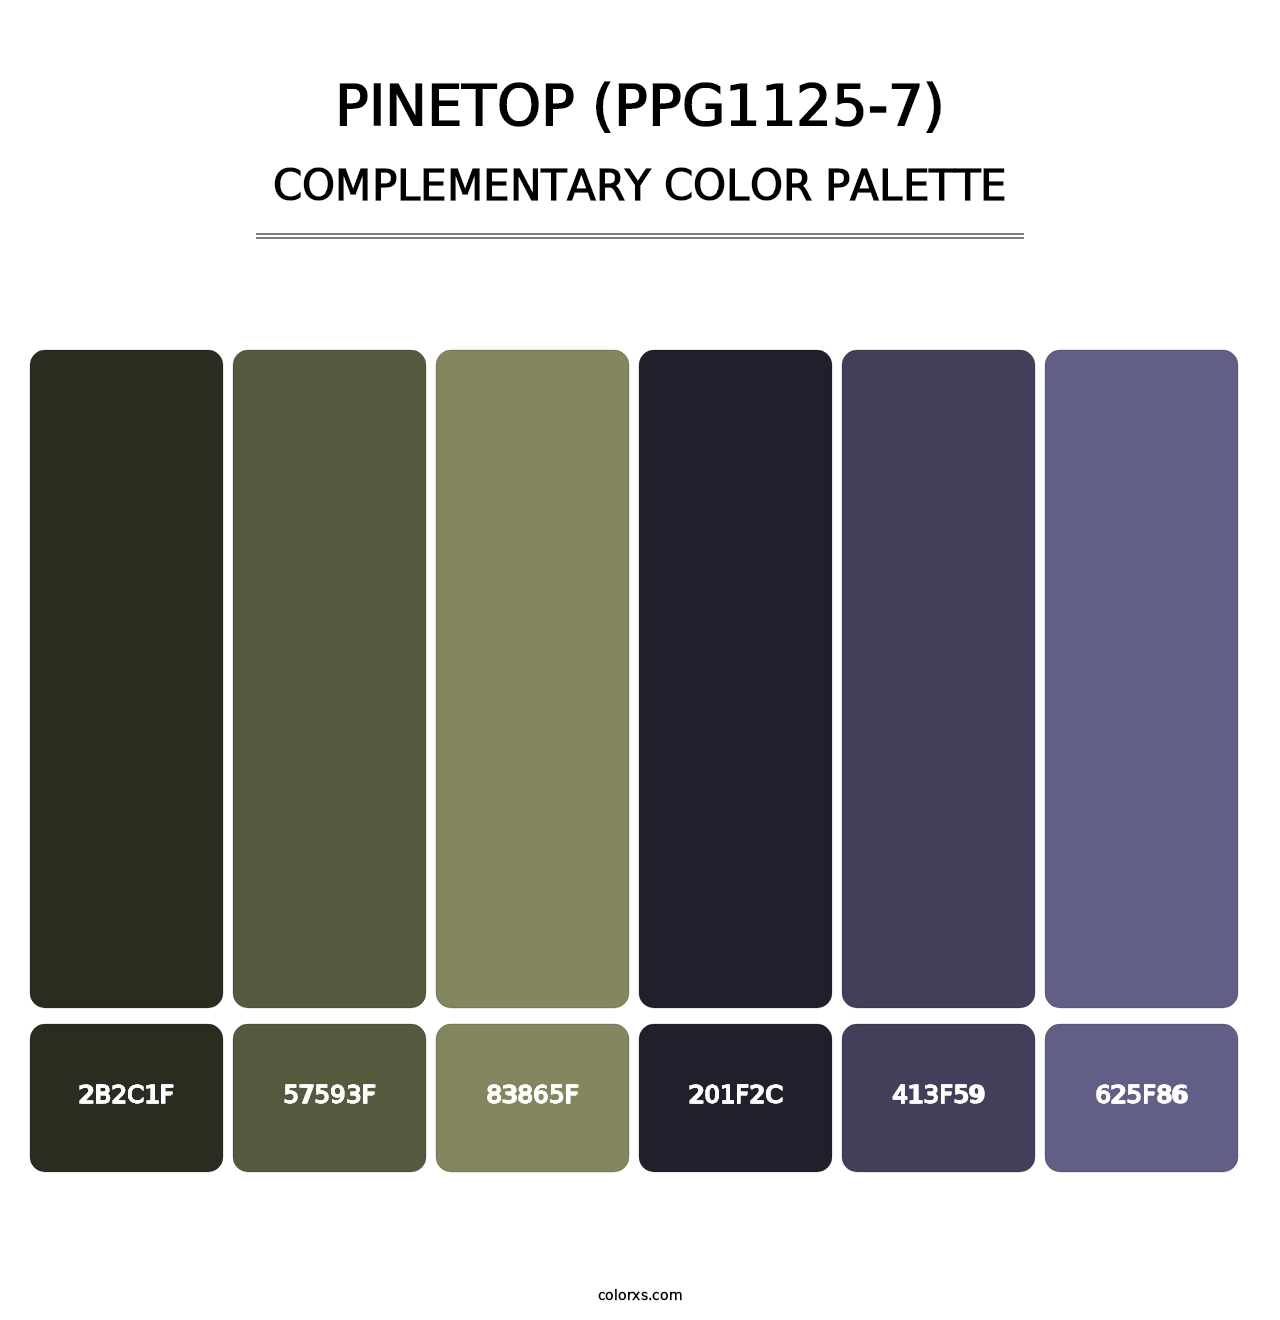 Pinetop (PPG1125-7) - Complementary Color Palette